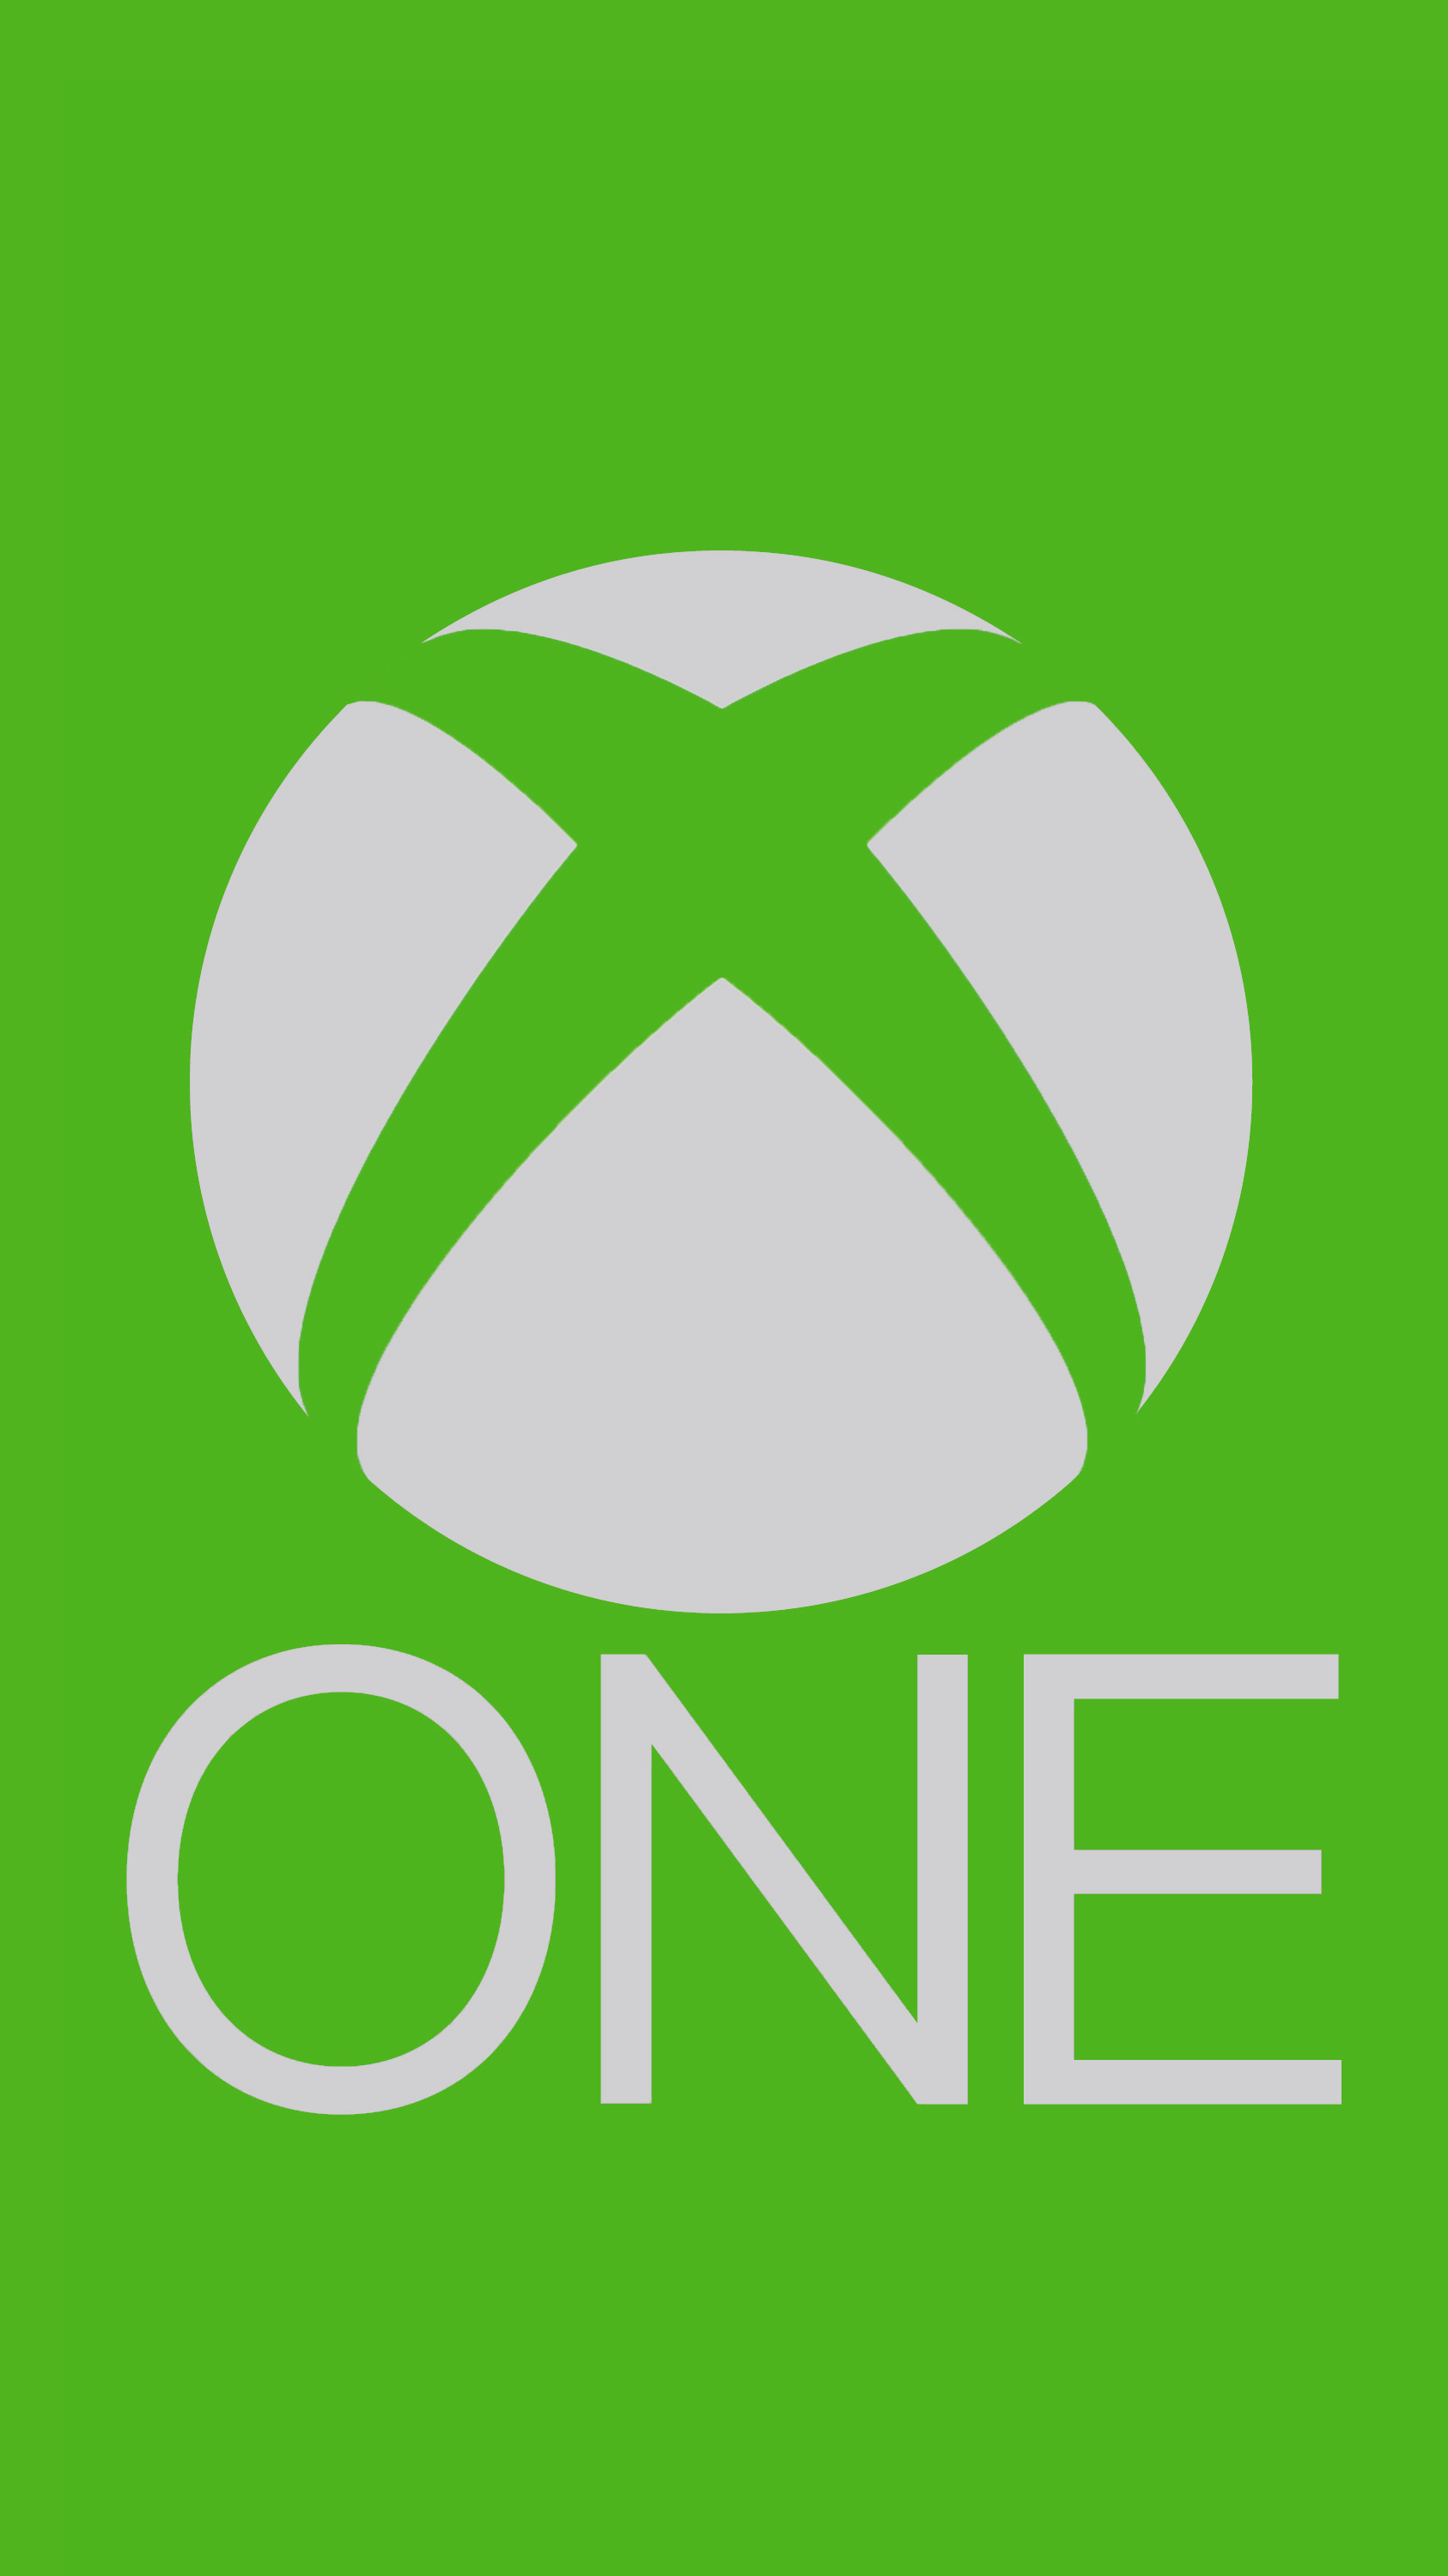 1686x3000 For any Xbox One fans I made a simplistic wallpaper - iPhone 5 - Imgur